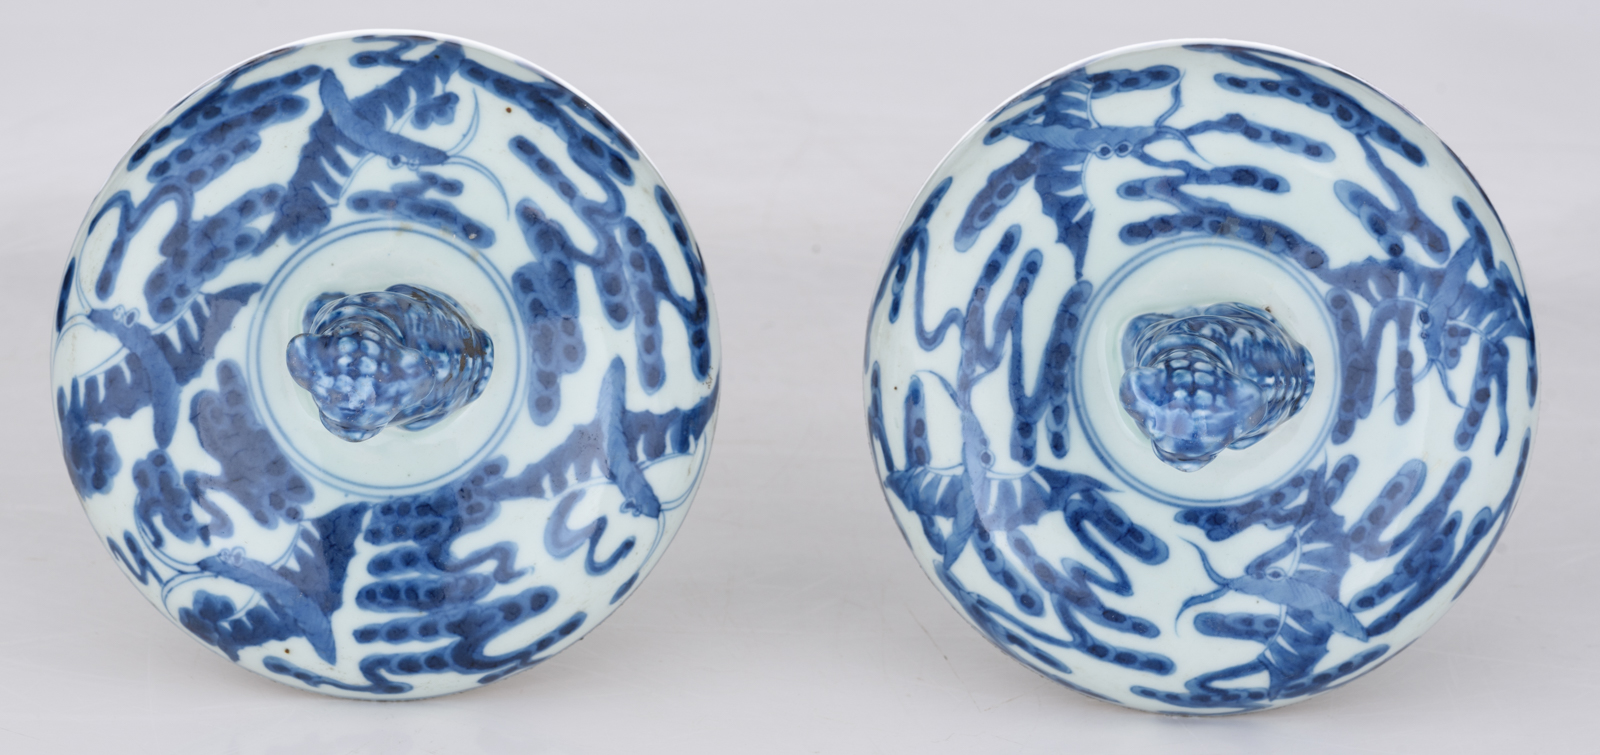 A pair of Chinese blue and white vases and covers, decorated with birds and flowers, 19thC, H 43 cm - Image 7 of 8